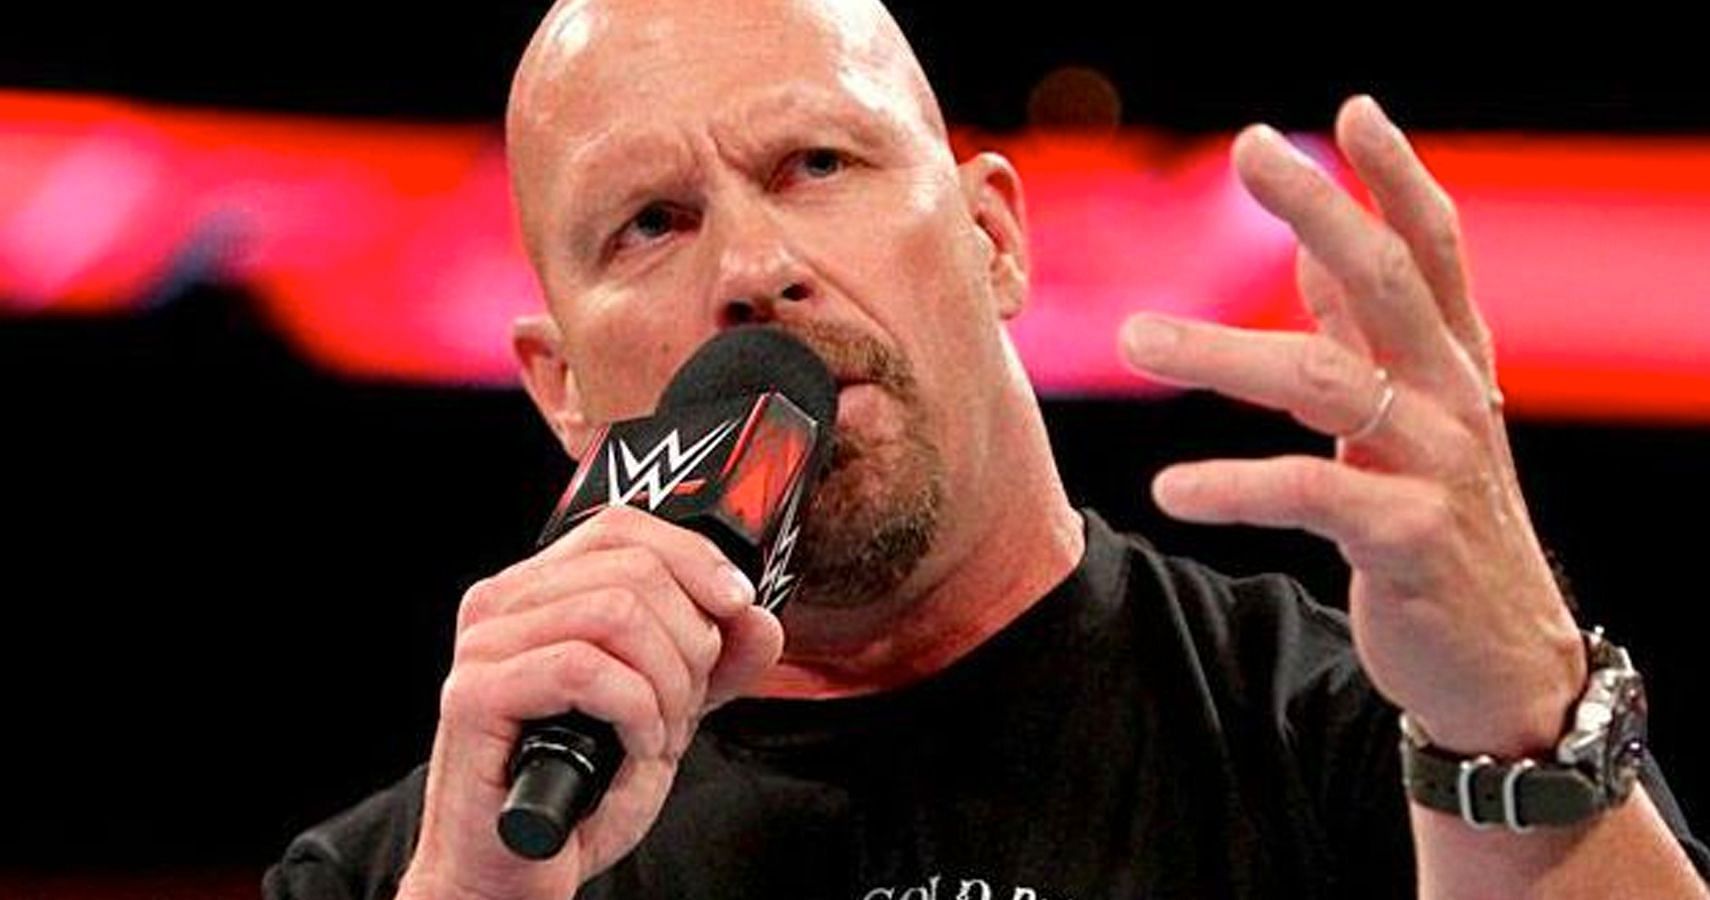 Steve Austin defeated Kevin Owens at WrestleMania